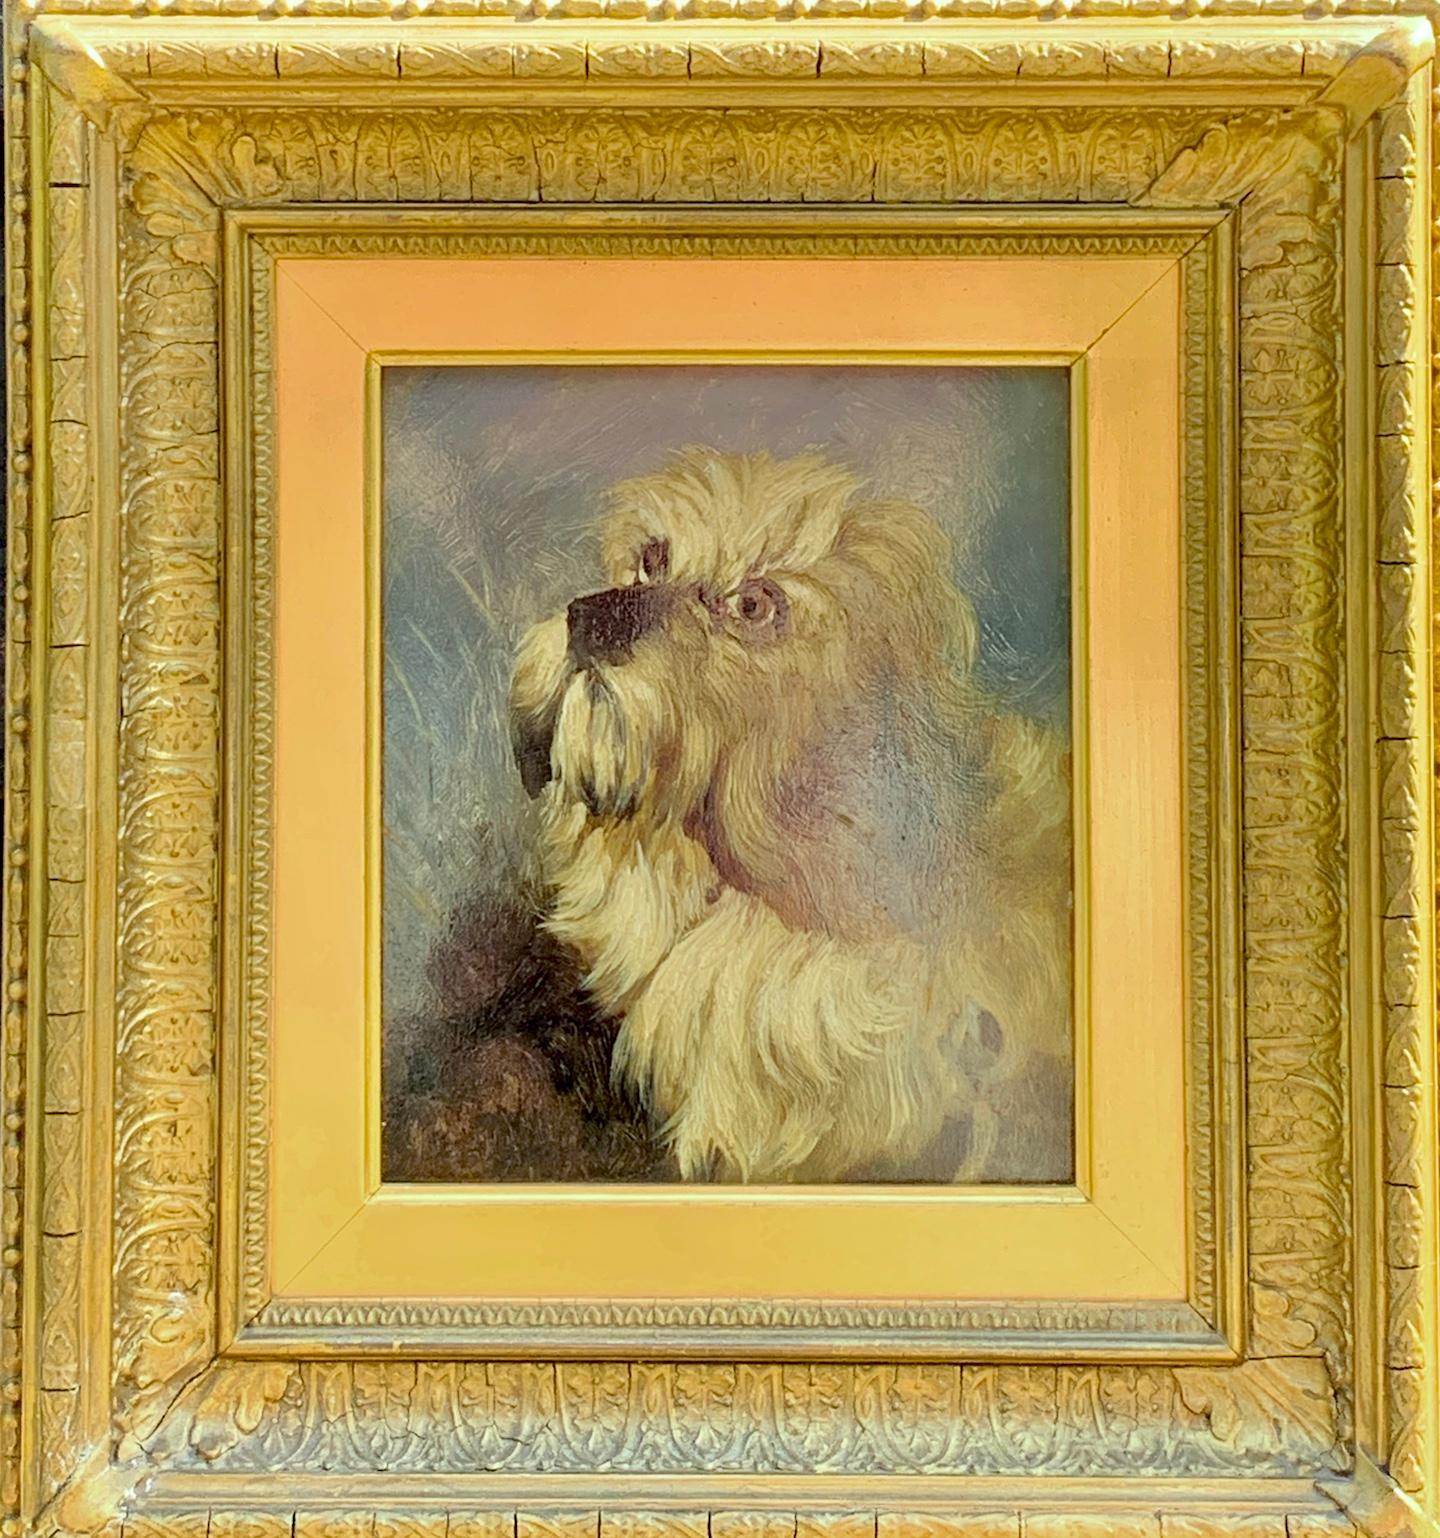 19th century English dog portrait of a Dandie Dinmont Terrier looking up 